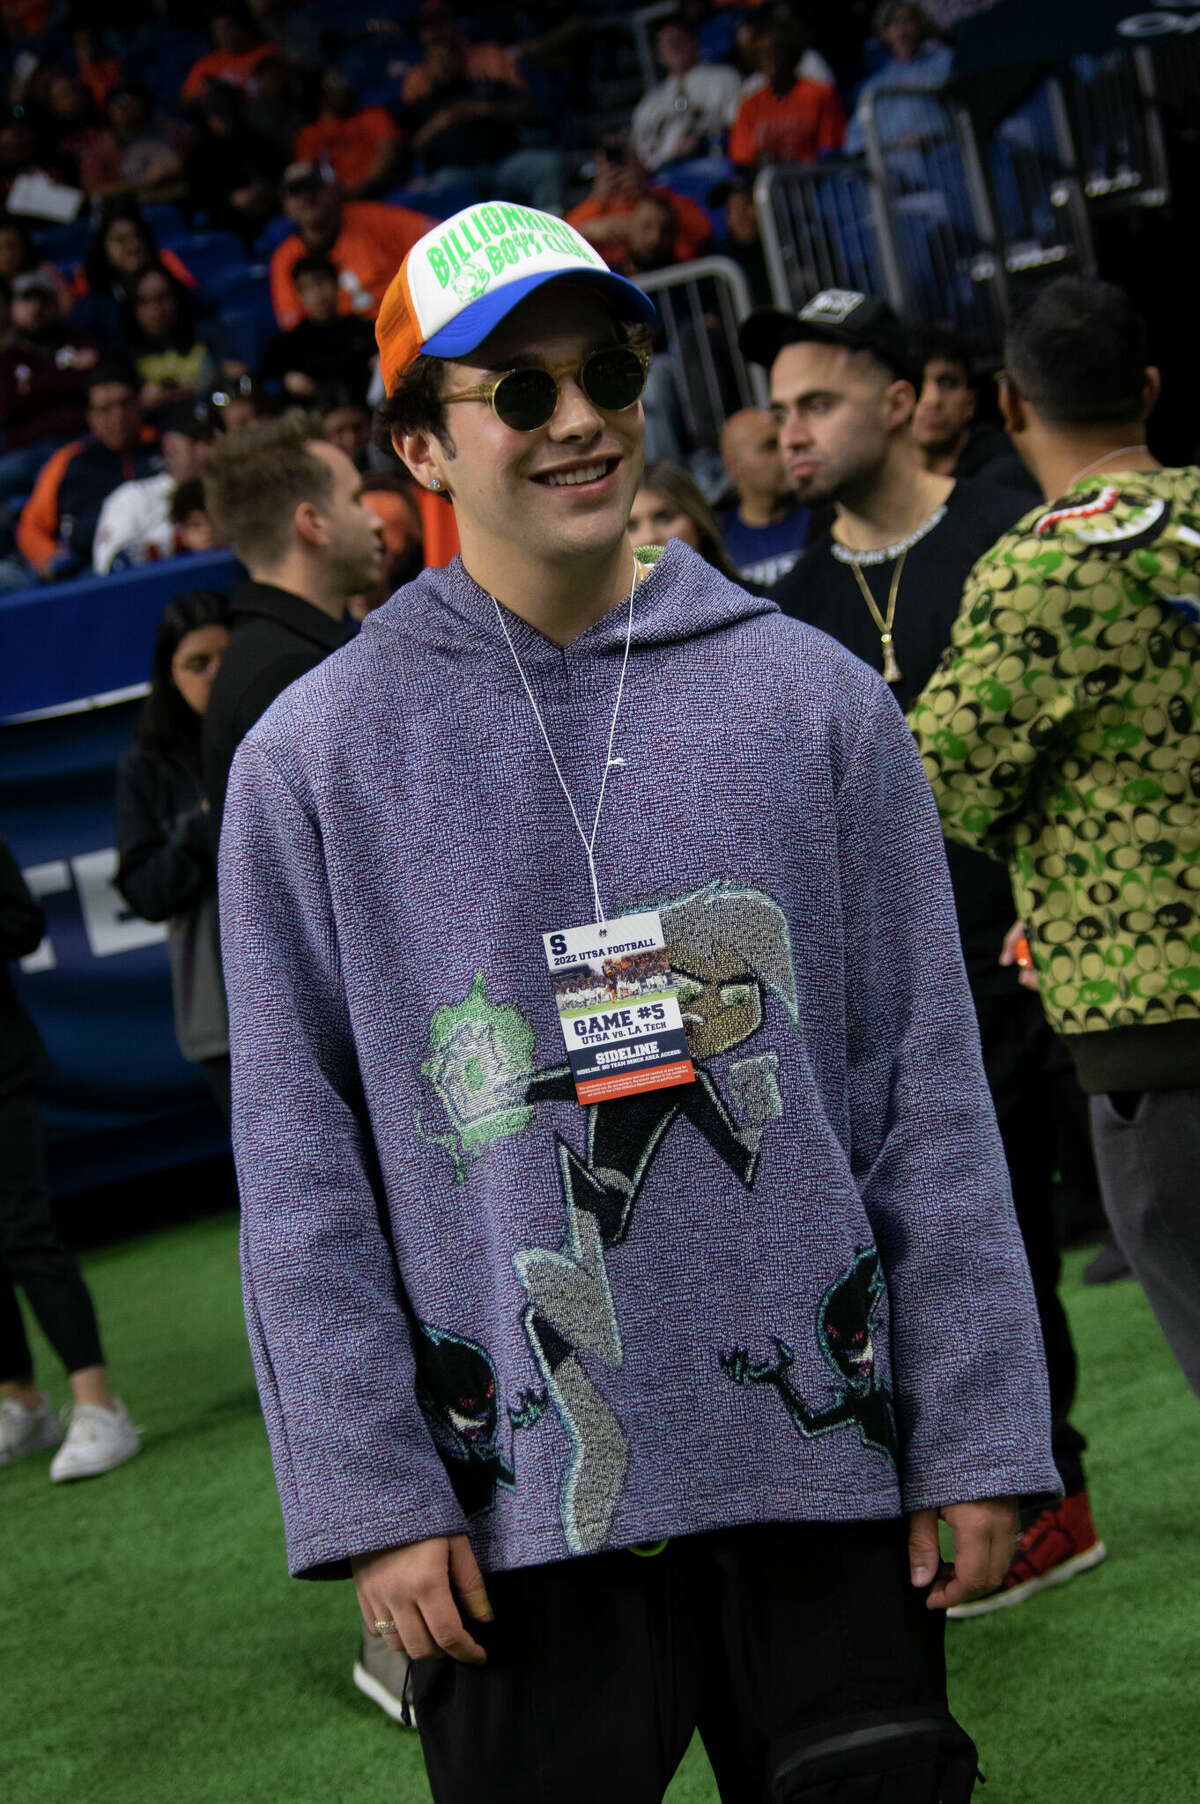 San Antonio native and singer-songwriter Austin Mahone watched the UTSA Roadrunners win over the Louisiana Tech Bulldogs from the sidelines at the Alamodome on November 12.